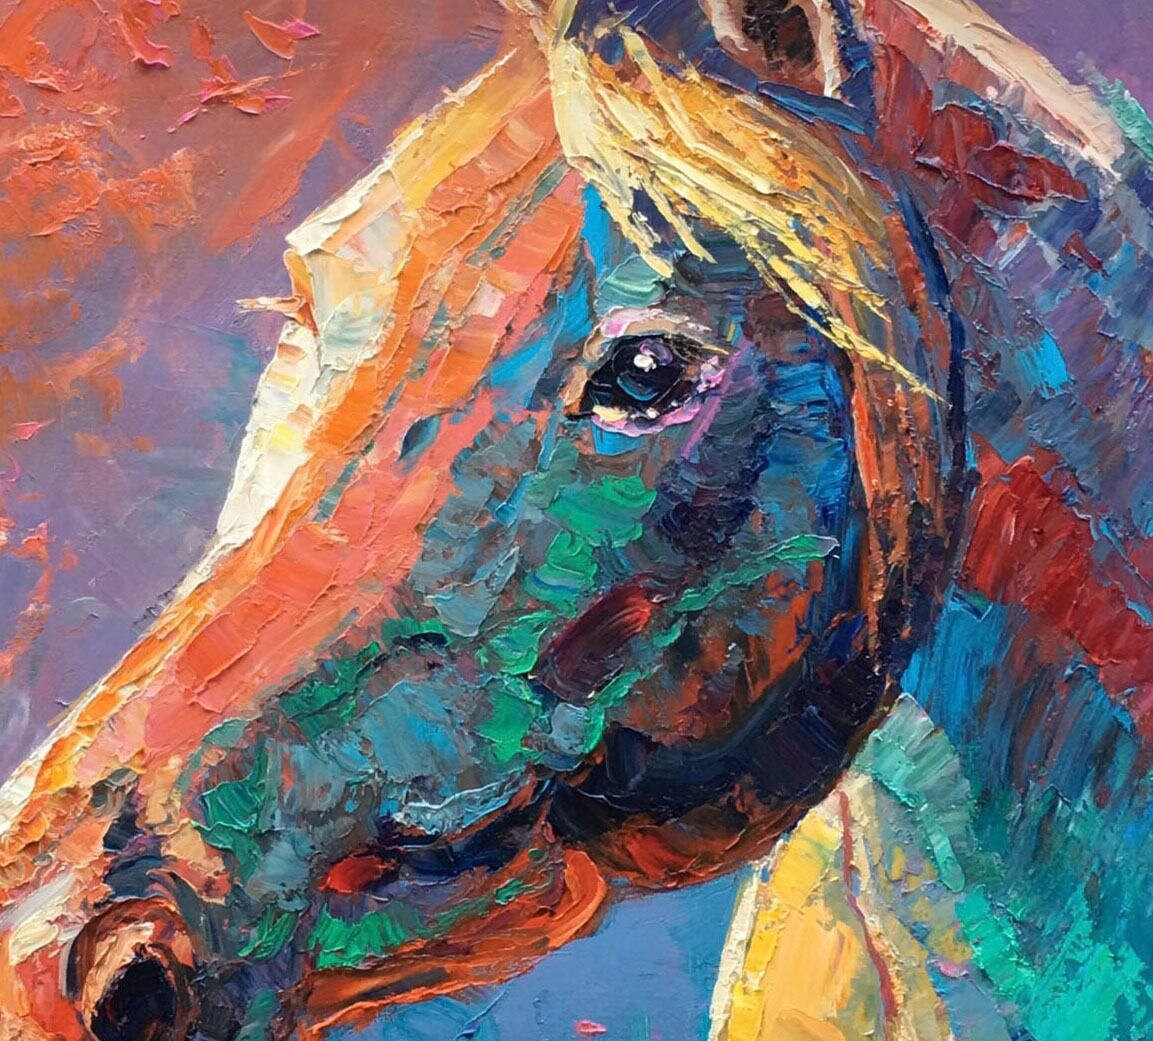 Horse Oil Painting, Large Wall Art Canvas, Horse Portrait, Decor, Original Painting, Large Canvas Painting, Contemporary Art